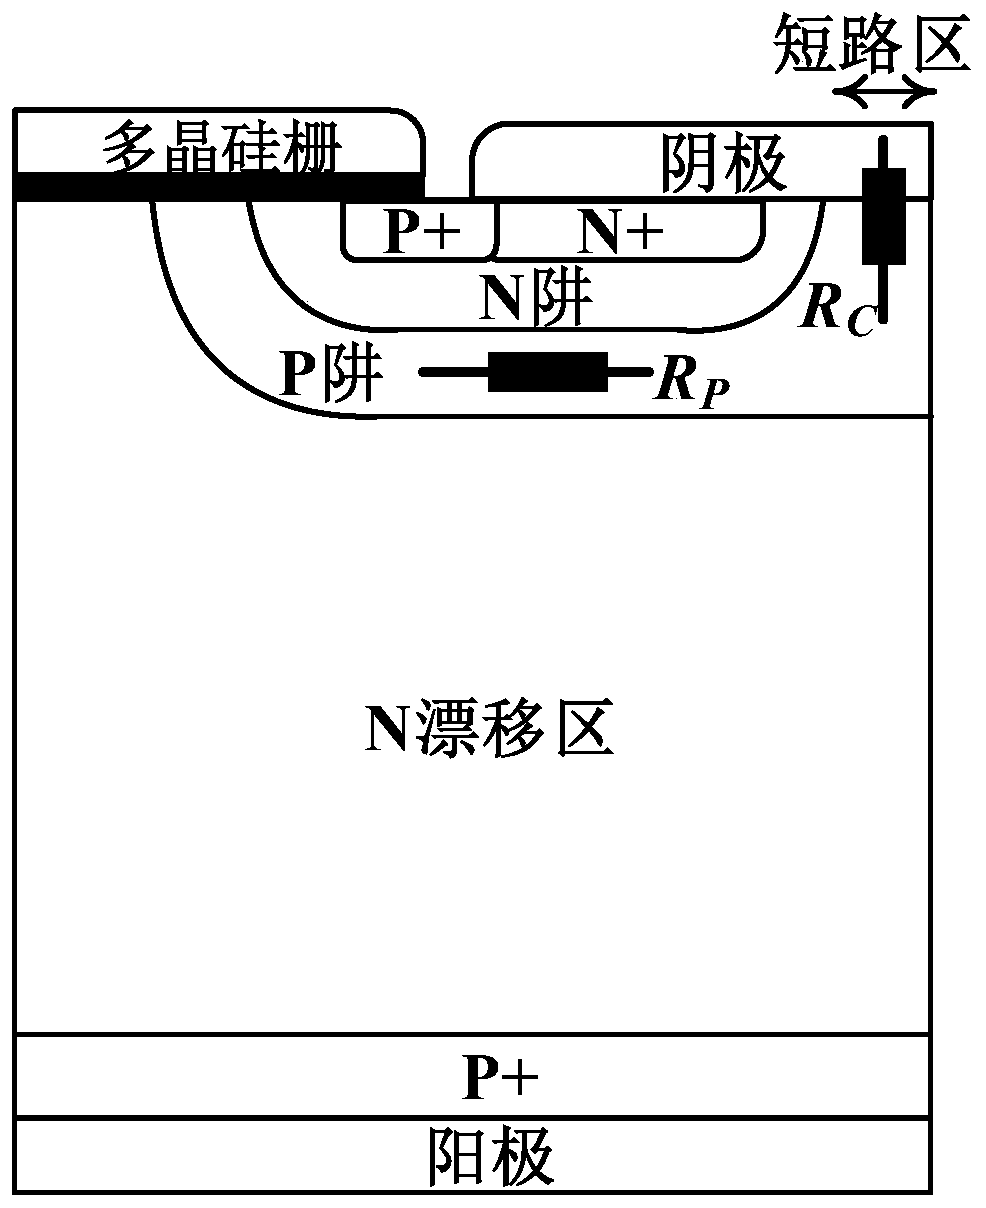 Direct-current solid-state circuit breaker based on cathode short-circuit grid-control thyristor